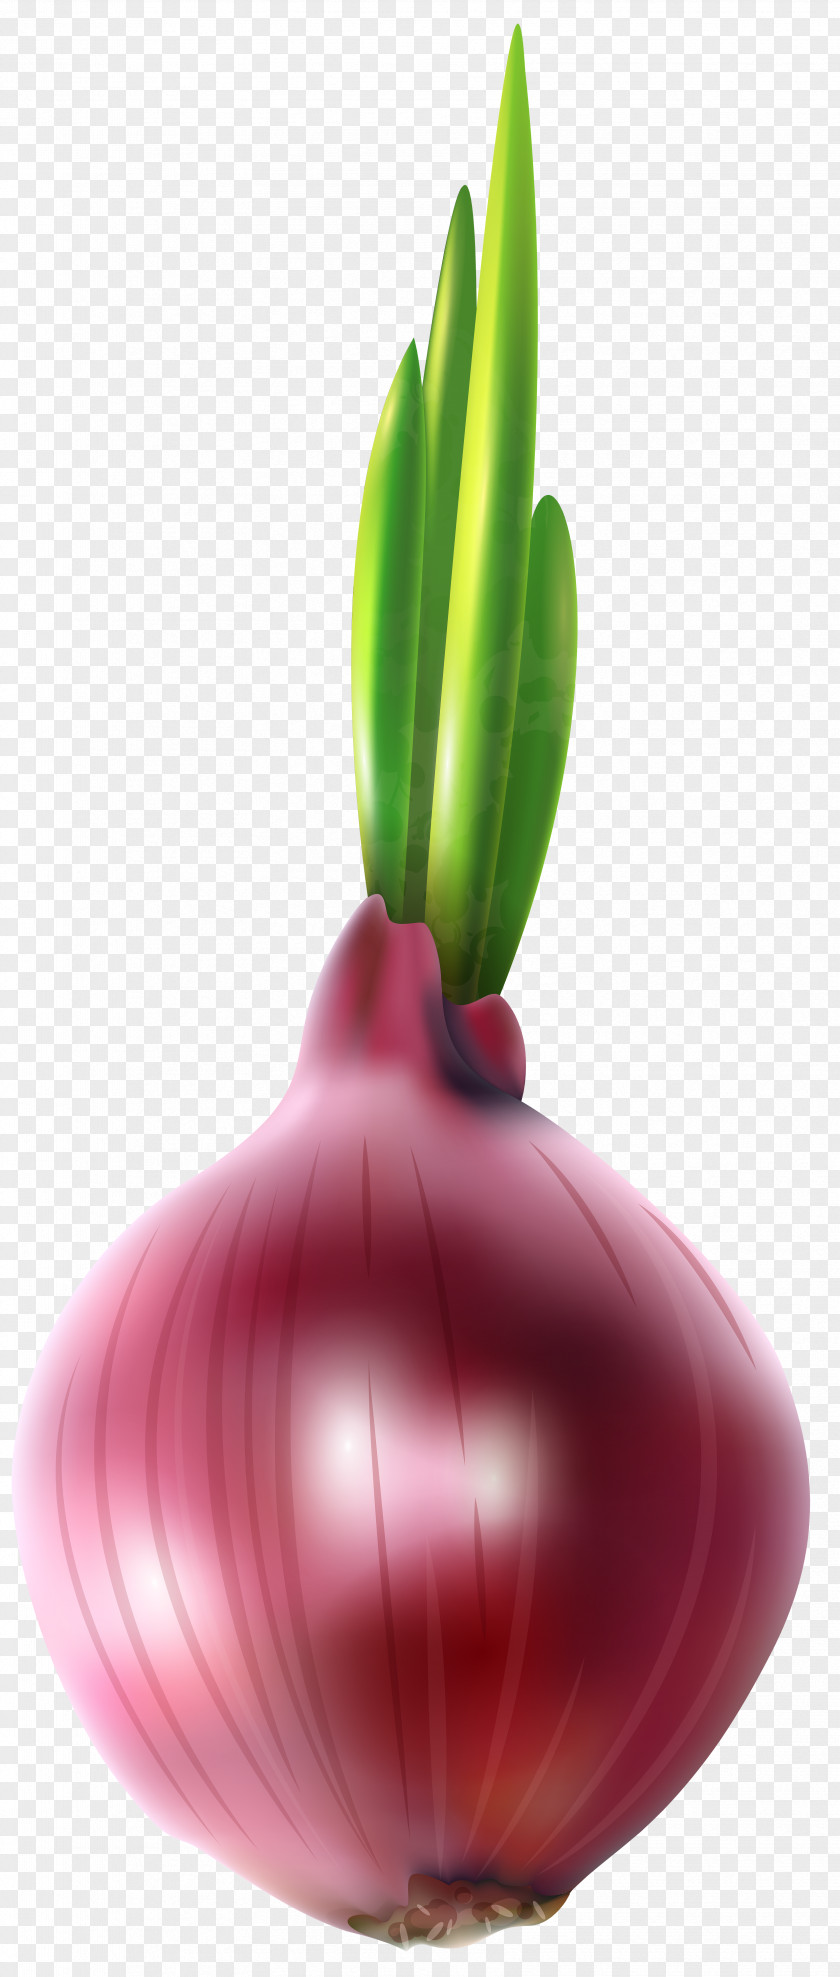 Red Onion Free Clip Art Image Computer File PNG